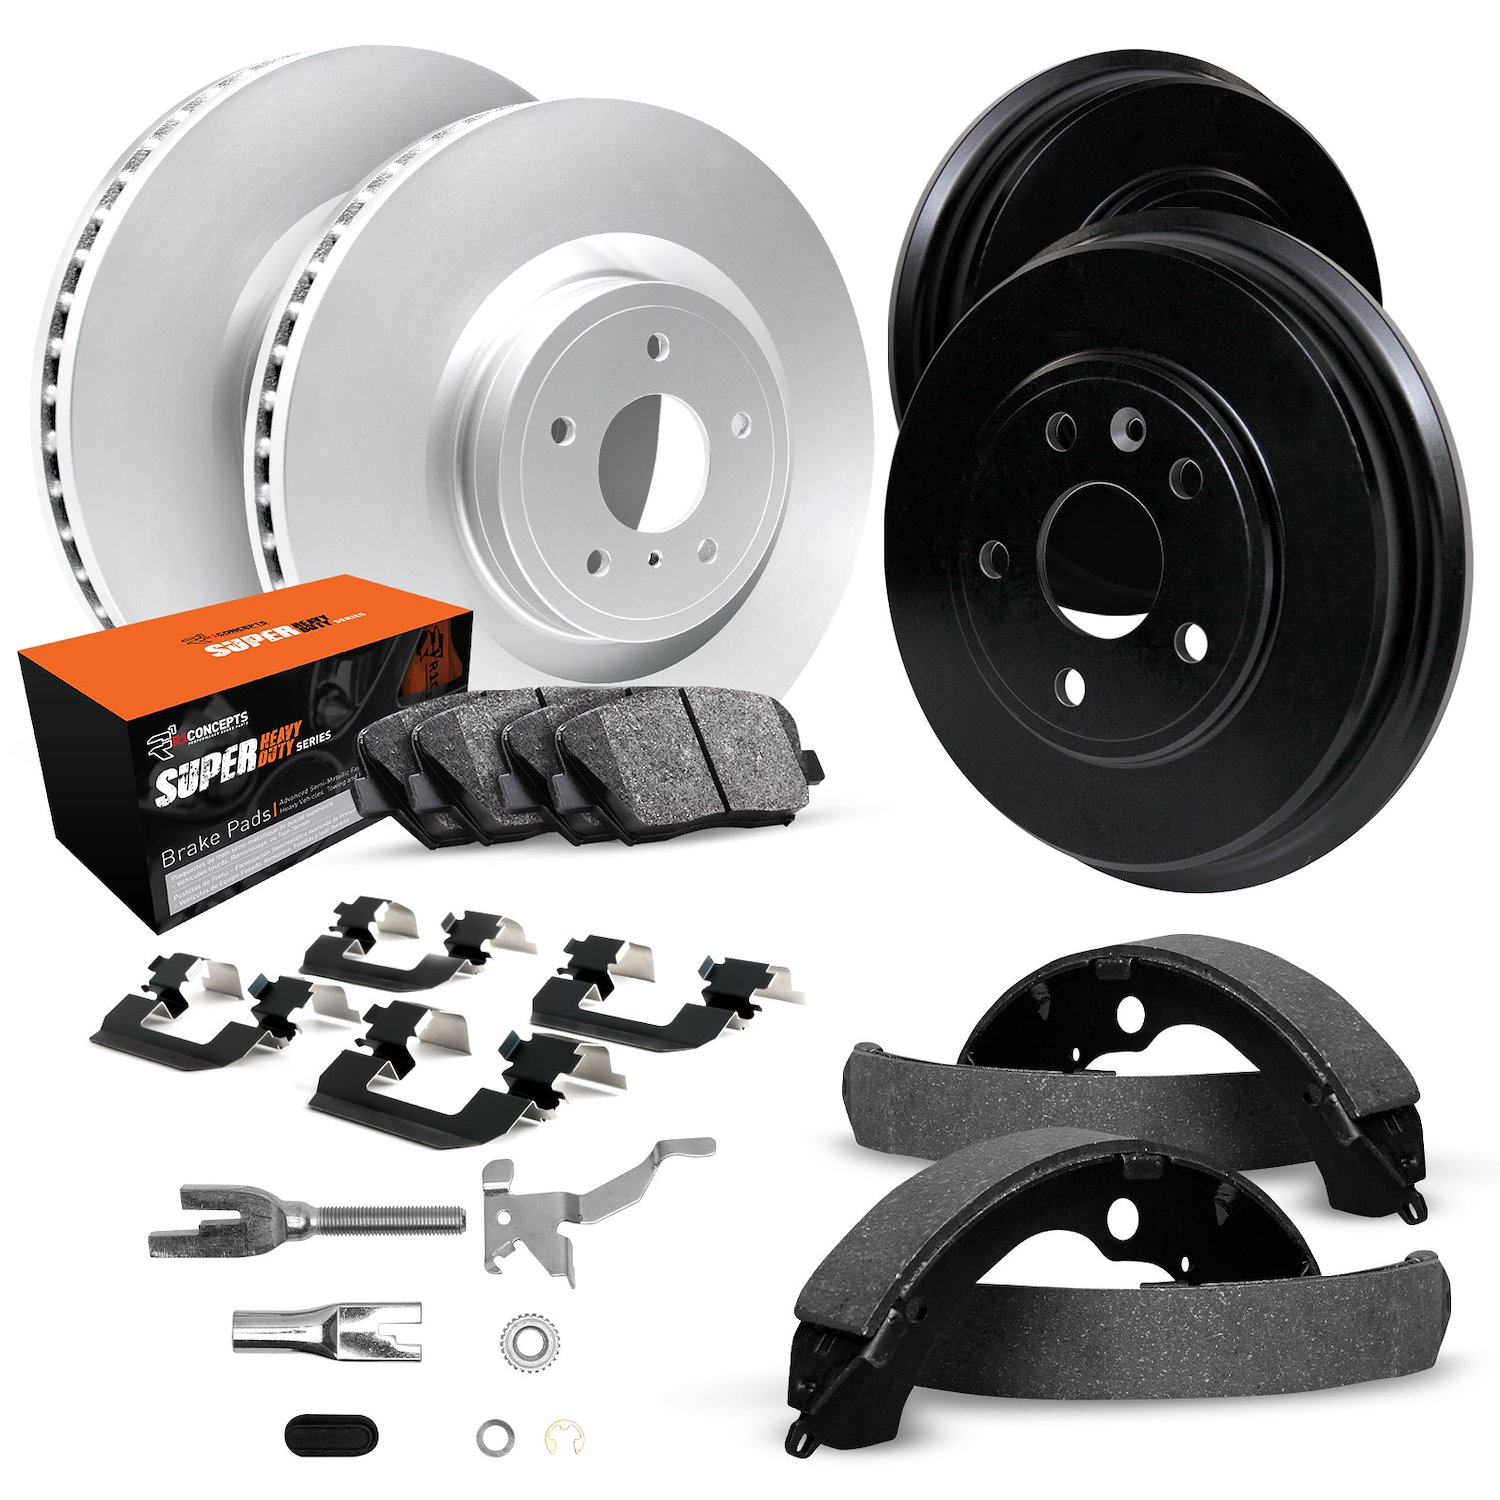 GEO-Carbon Brake Rotor & Drum Set w/Super-Duty Pads, Shoes, Hardware/Adjusters, 1969-1972 GM, Position: Front & Rear